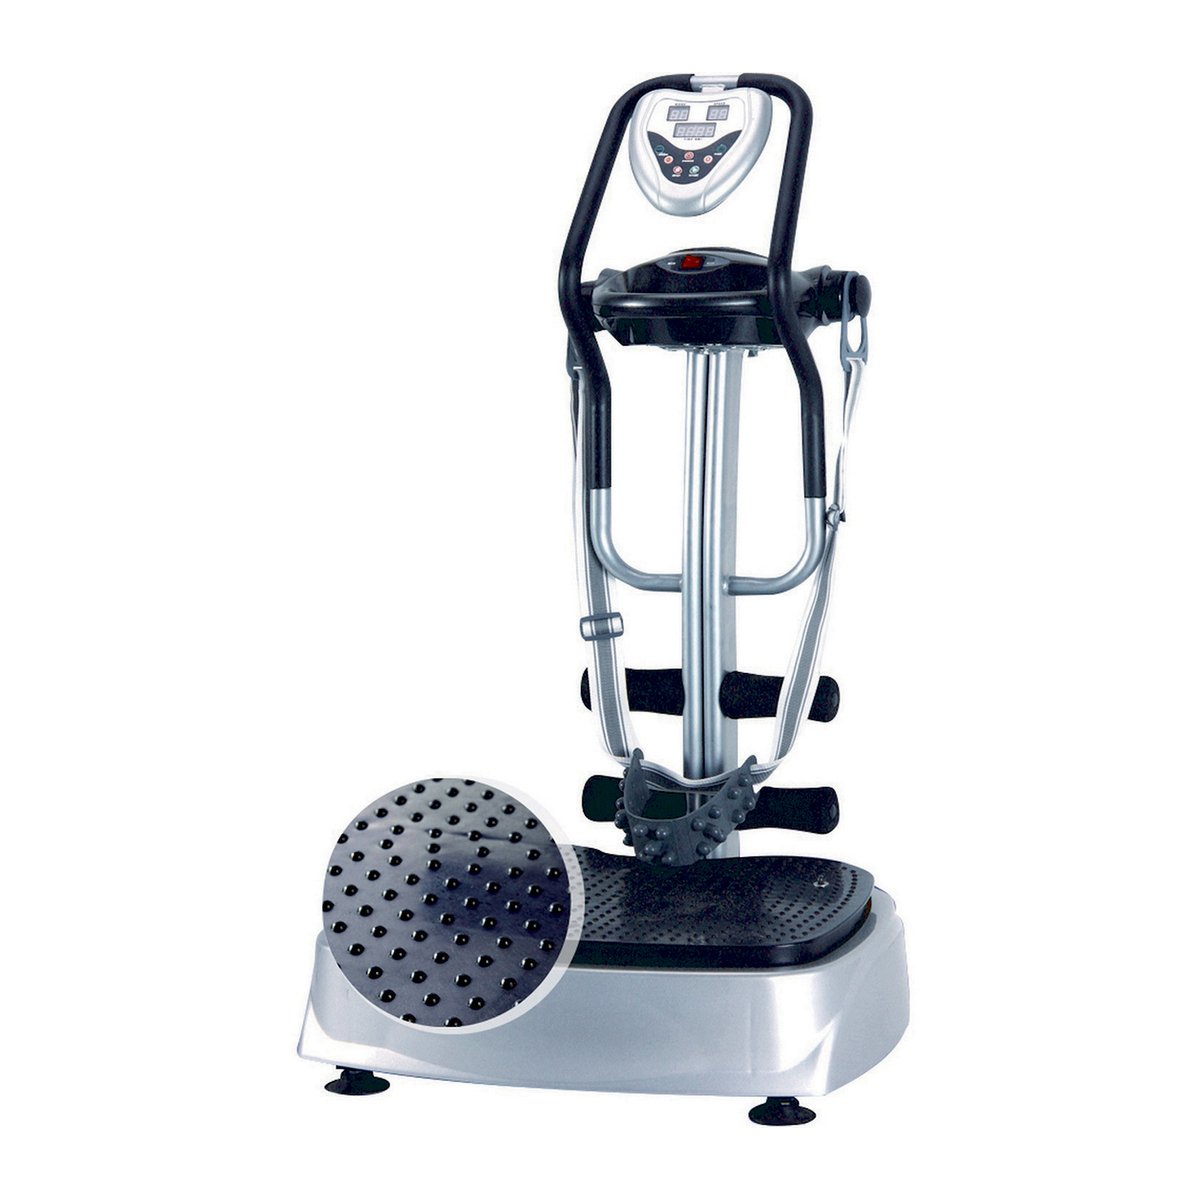 Euro Fitness Vibration Plate 3 In 1 QMJ315